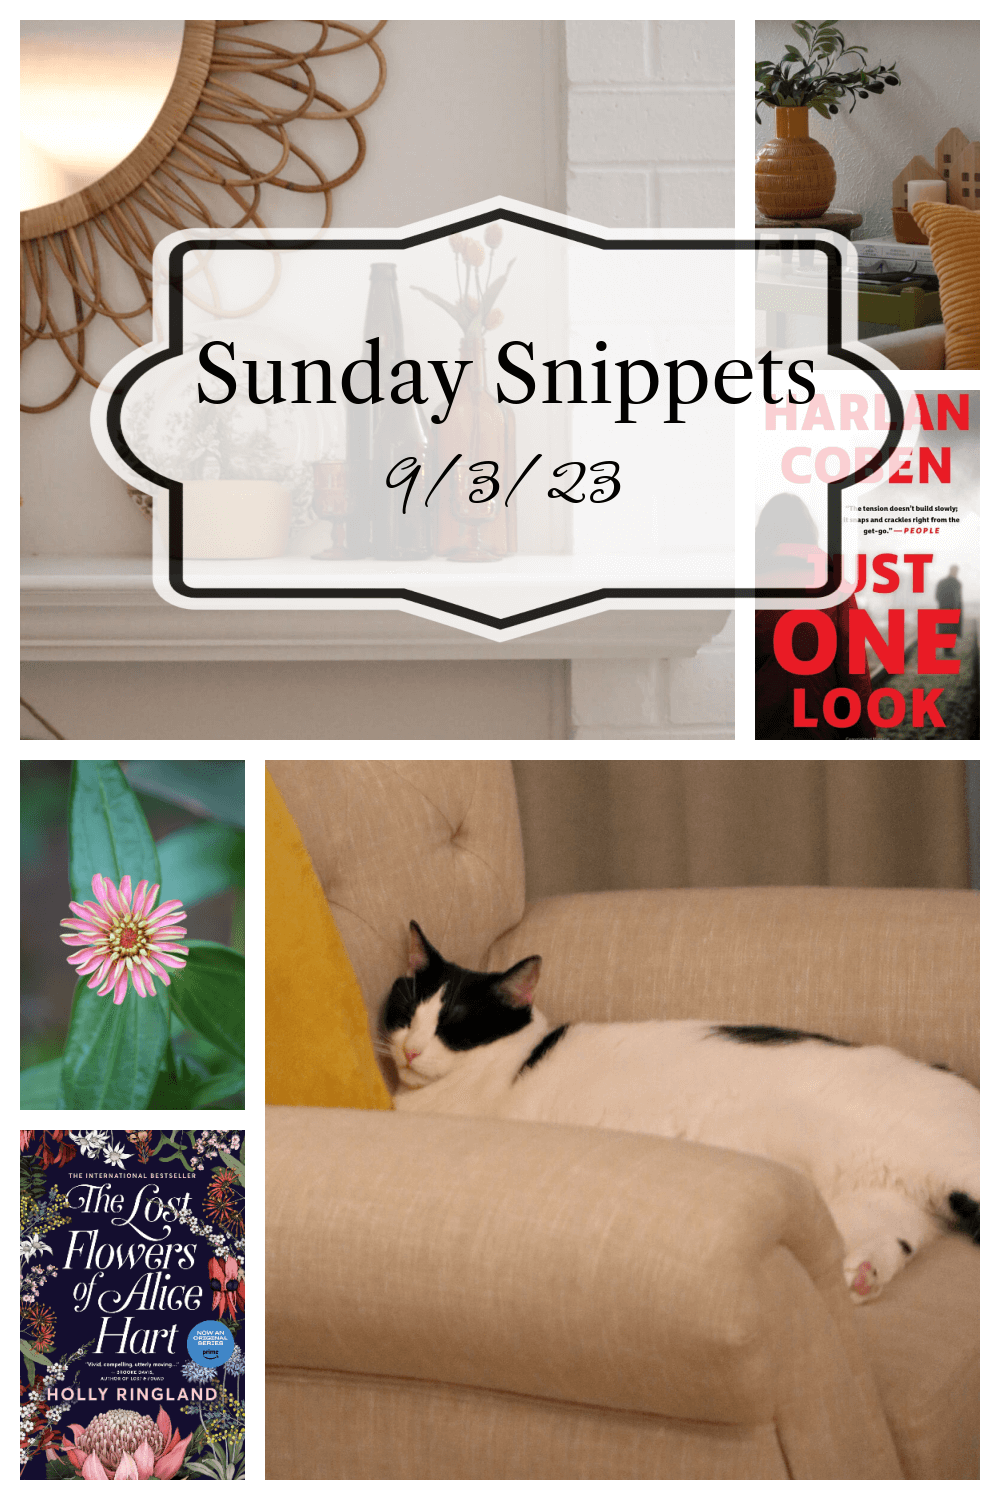 Sunday Snippets 9/3/23 graphic